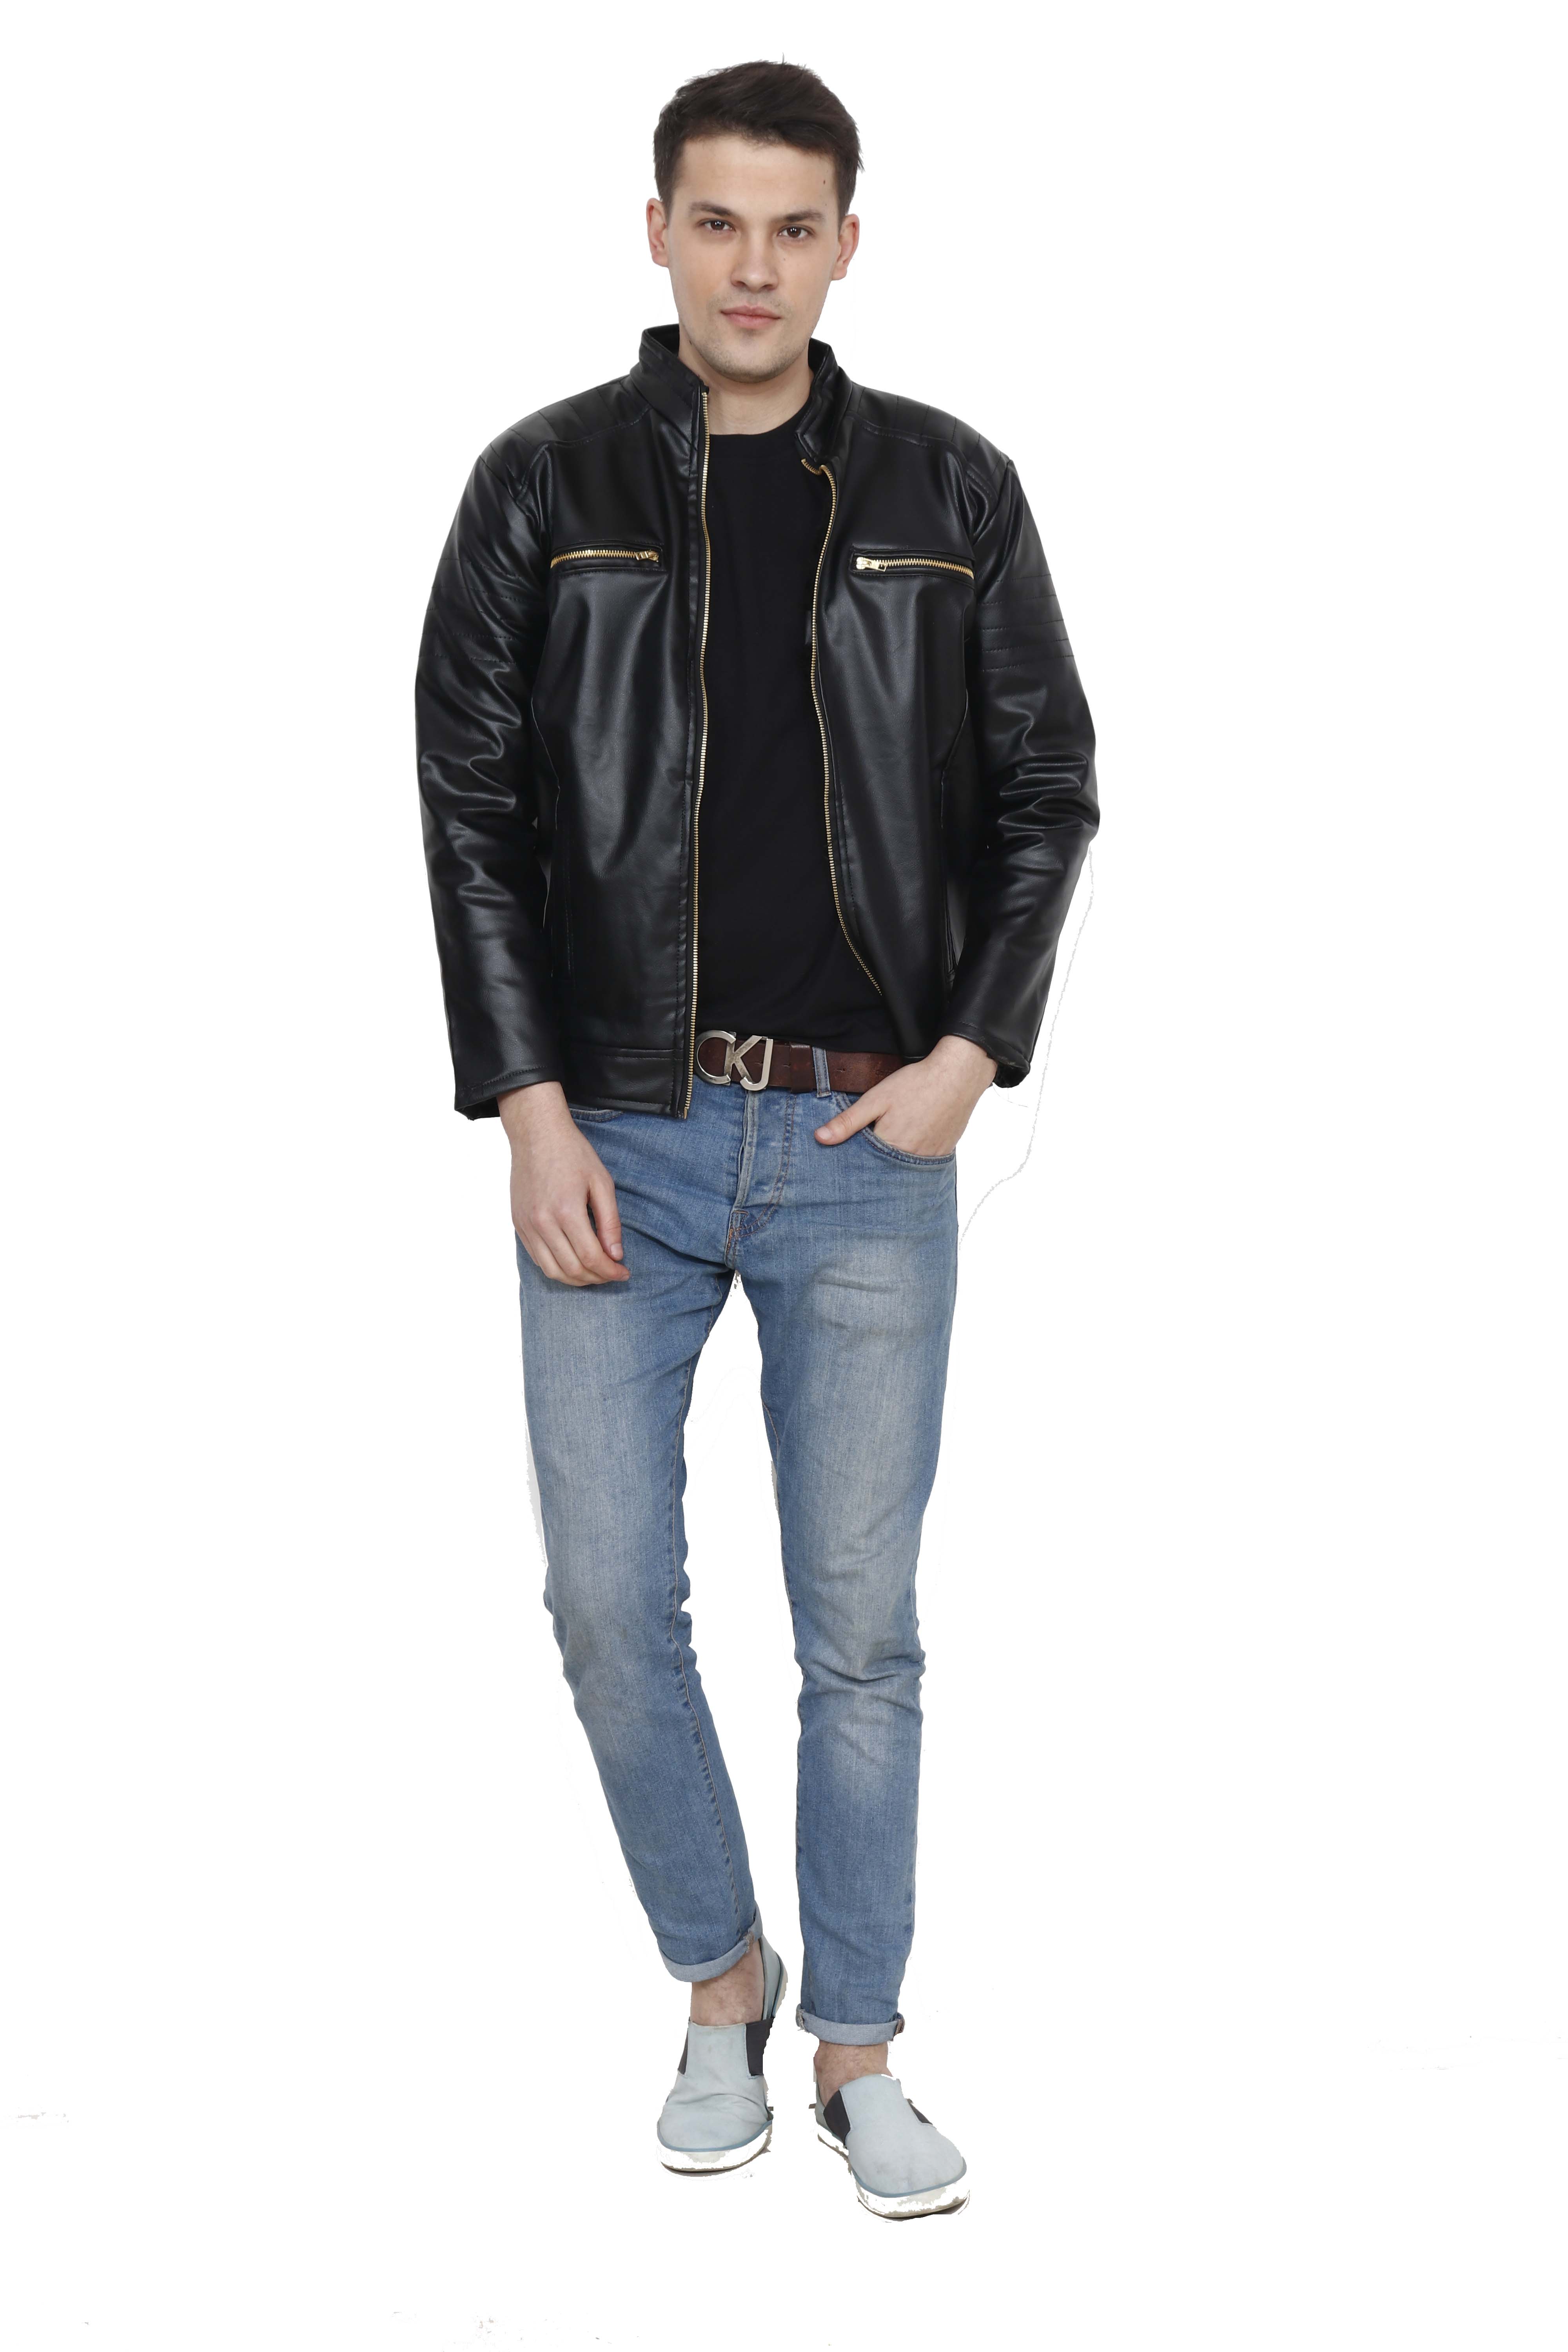 Buy Bona Black Leather Jackets For Mens Online @ ₹1499 from ShopClues